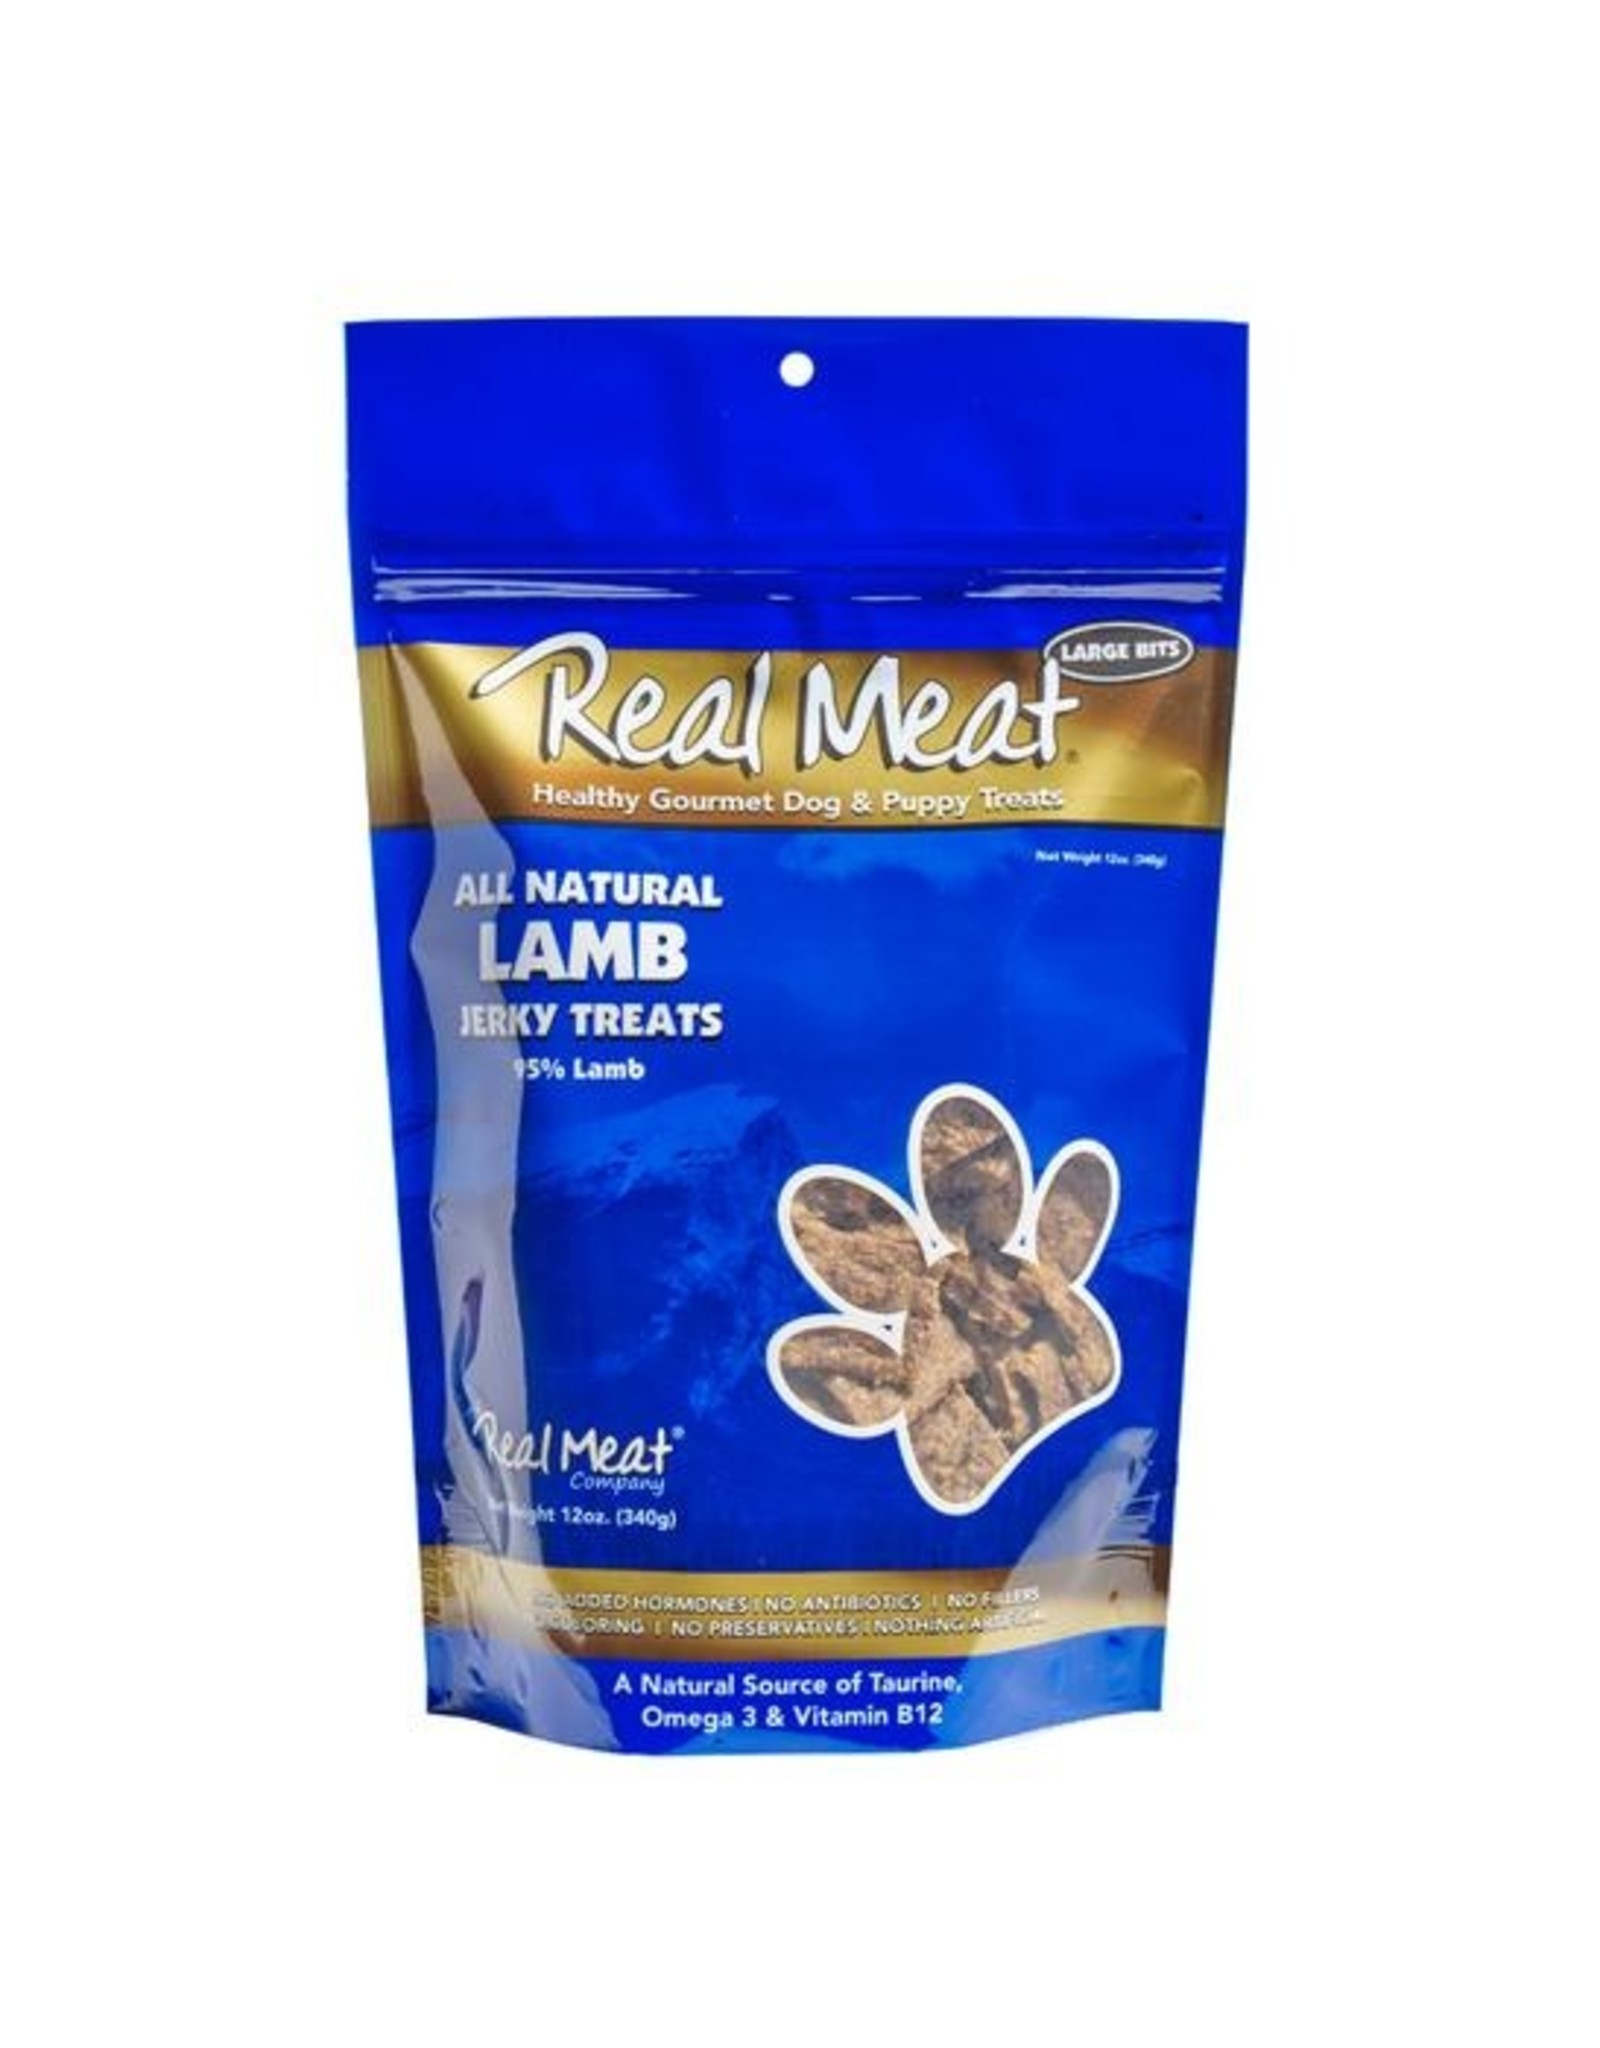 The Real Meat Company The Real Meat Dog Treats Lamb